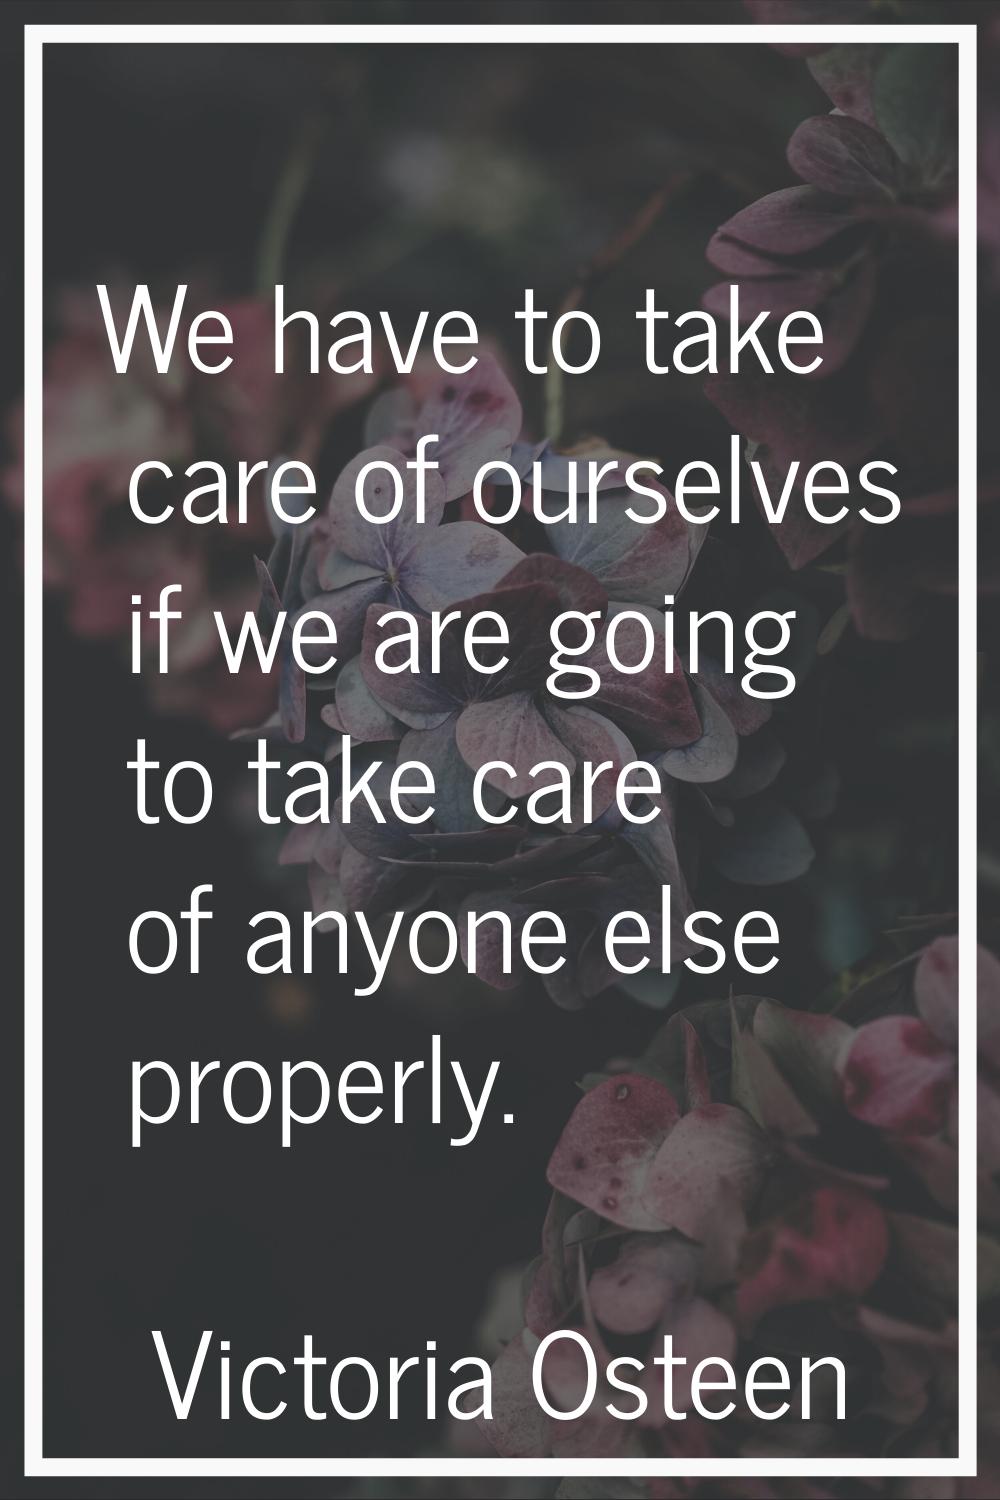 We have to take care of ourselves if we are going to take care of anyone else properly.